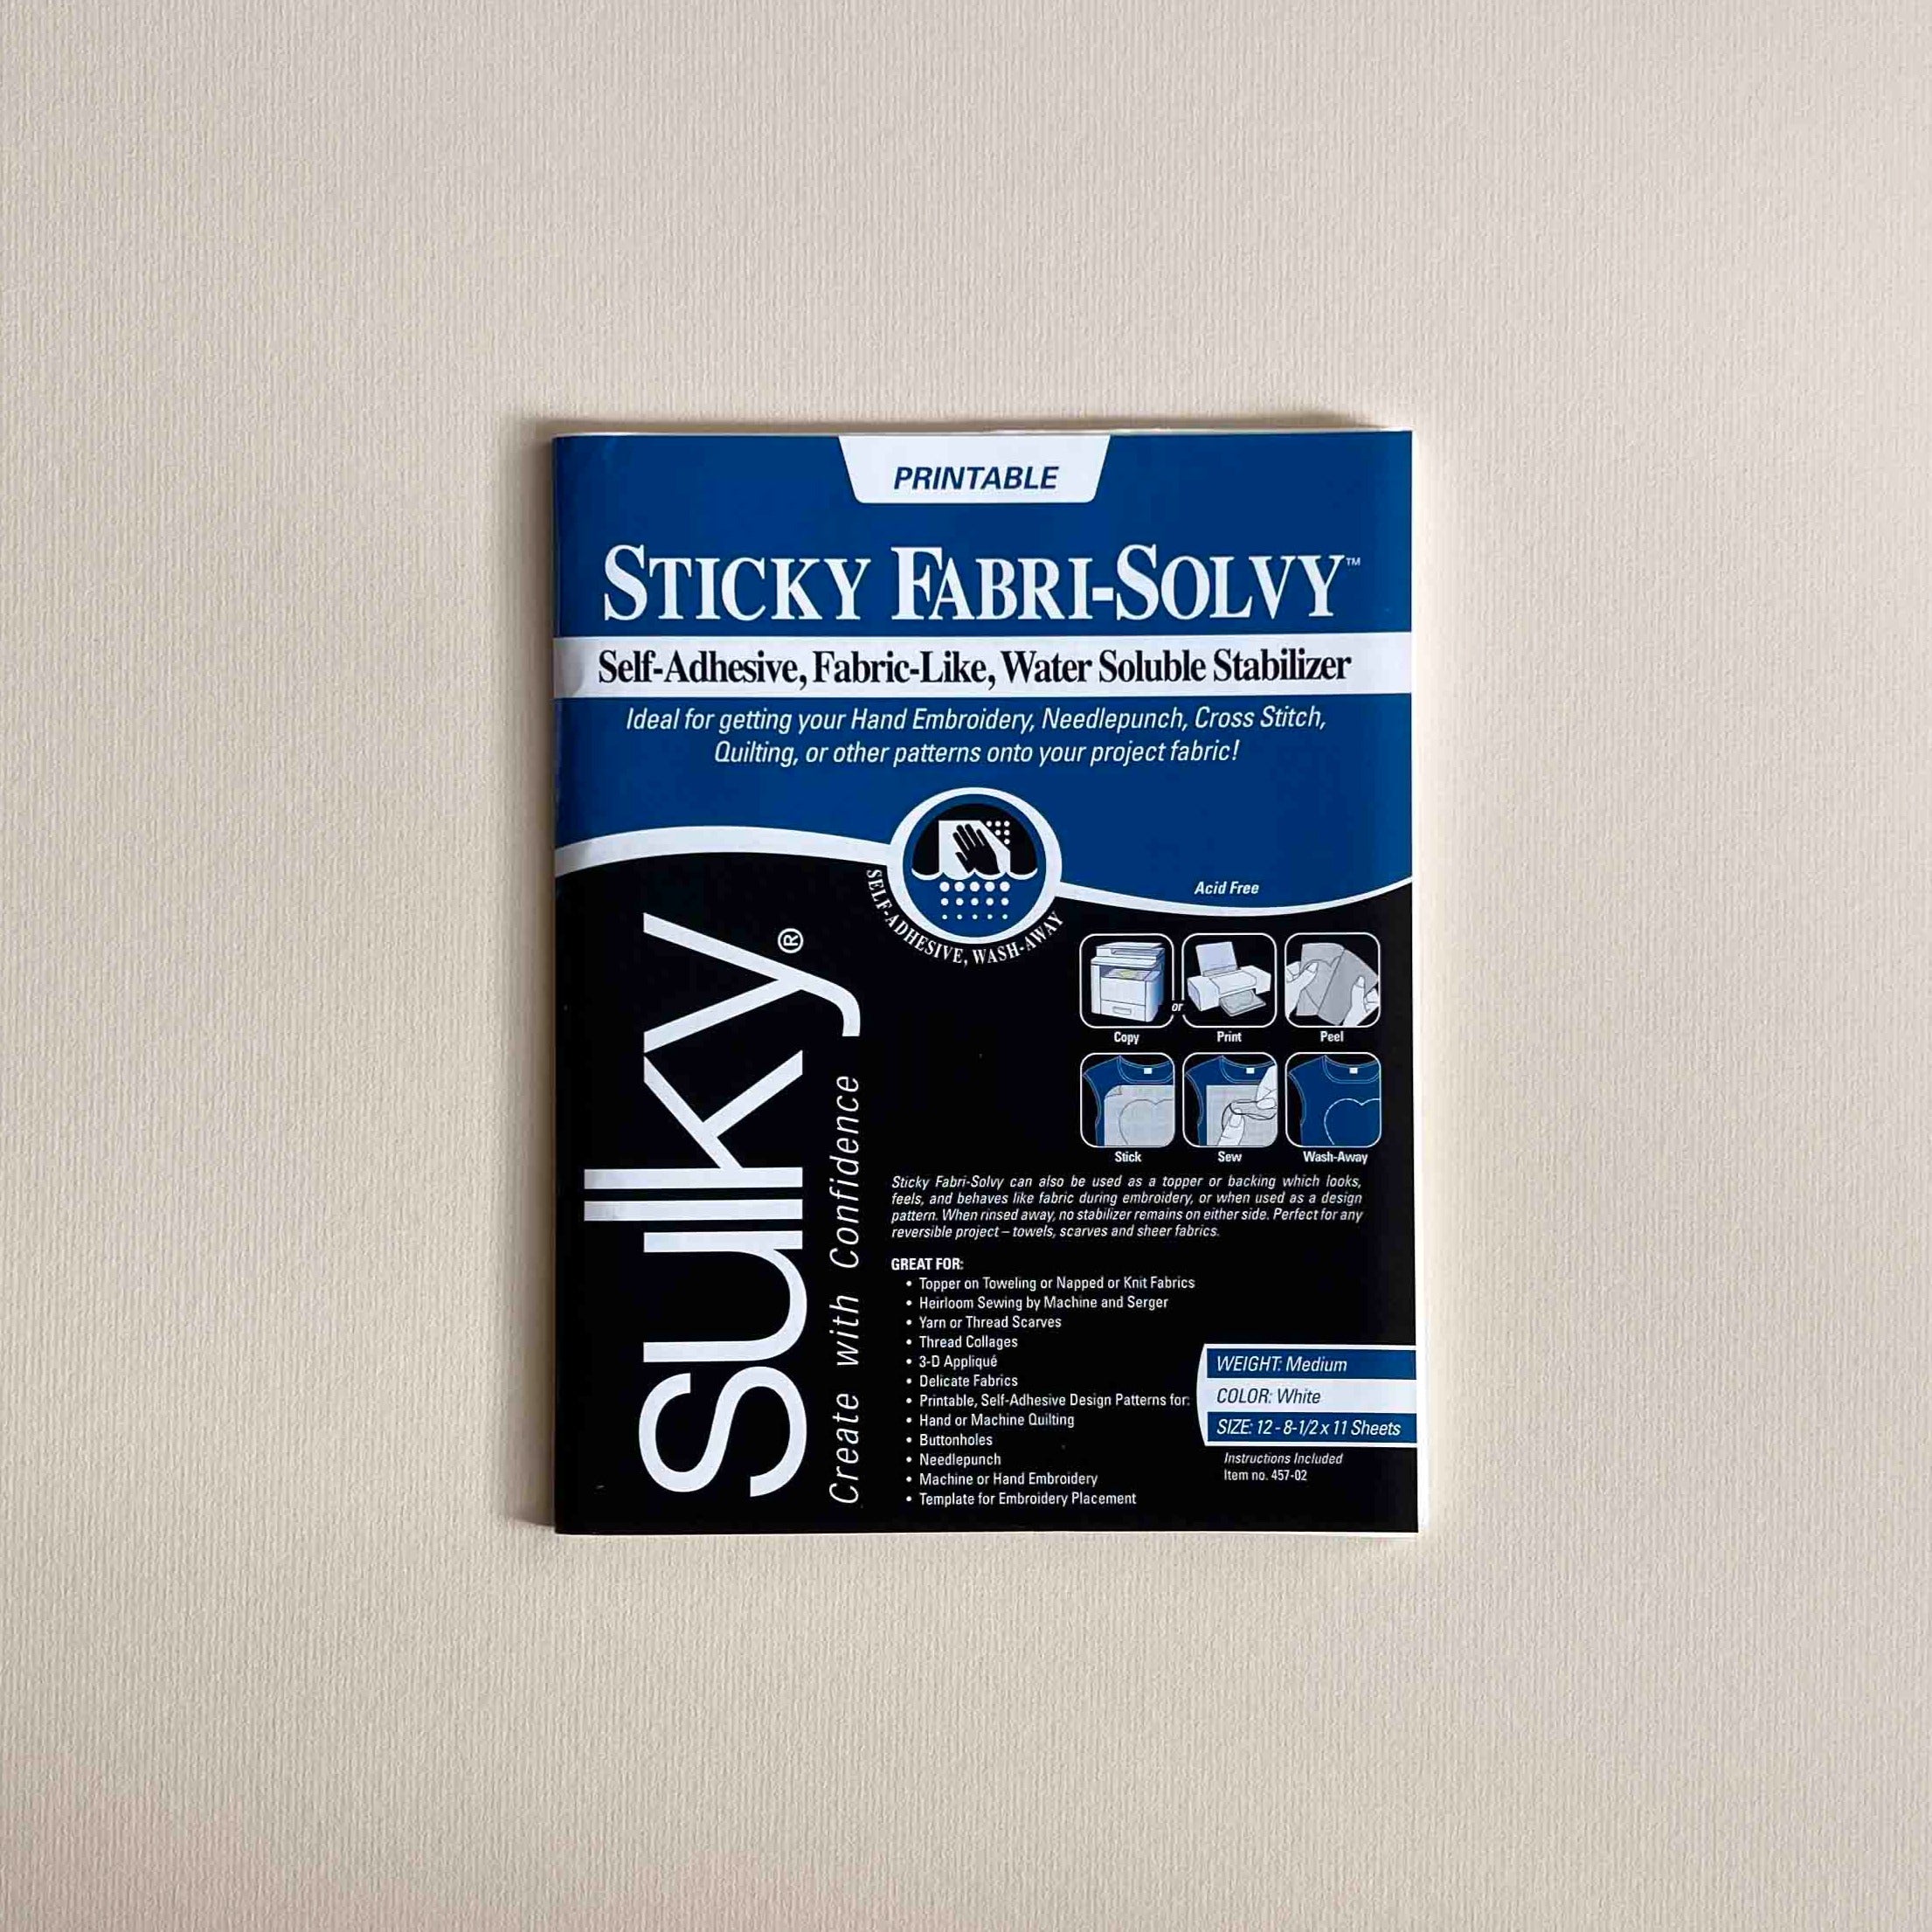 Sulky cross stitch and embroidery stabilizers 